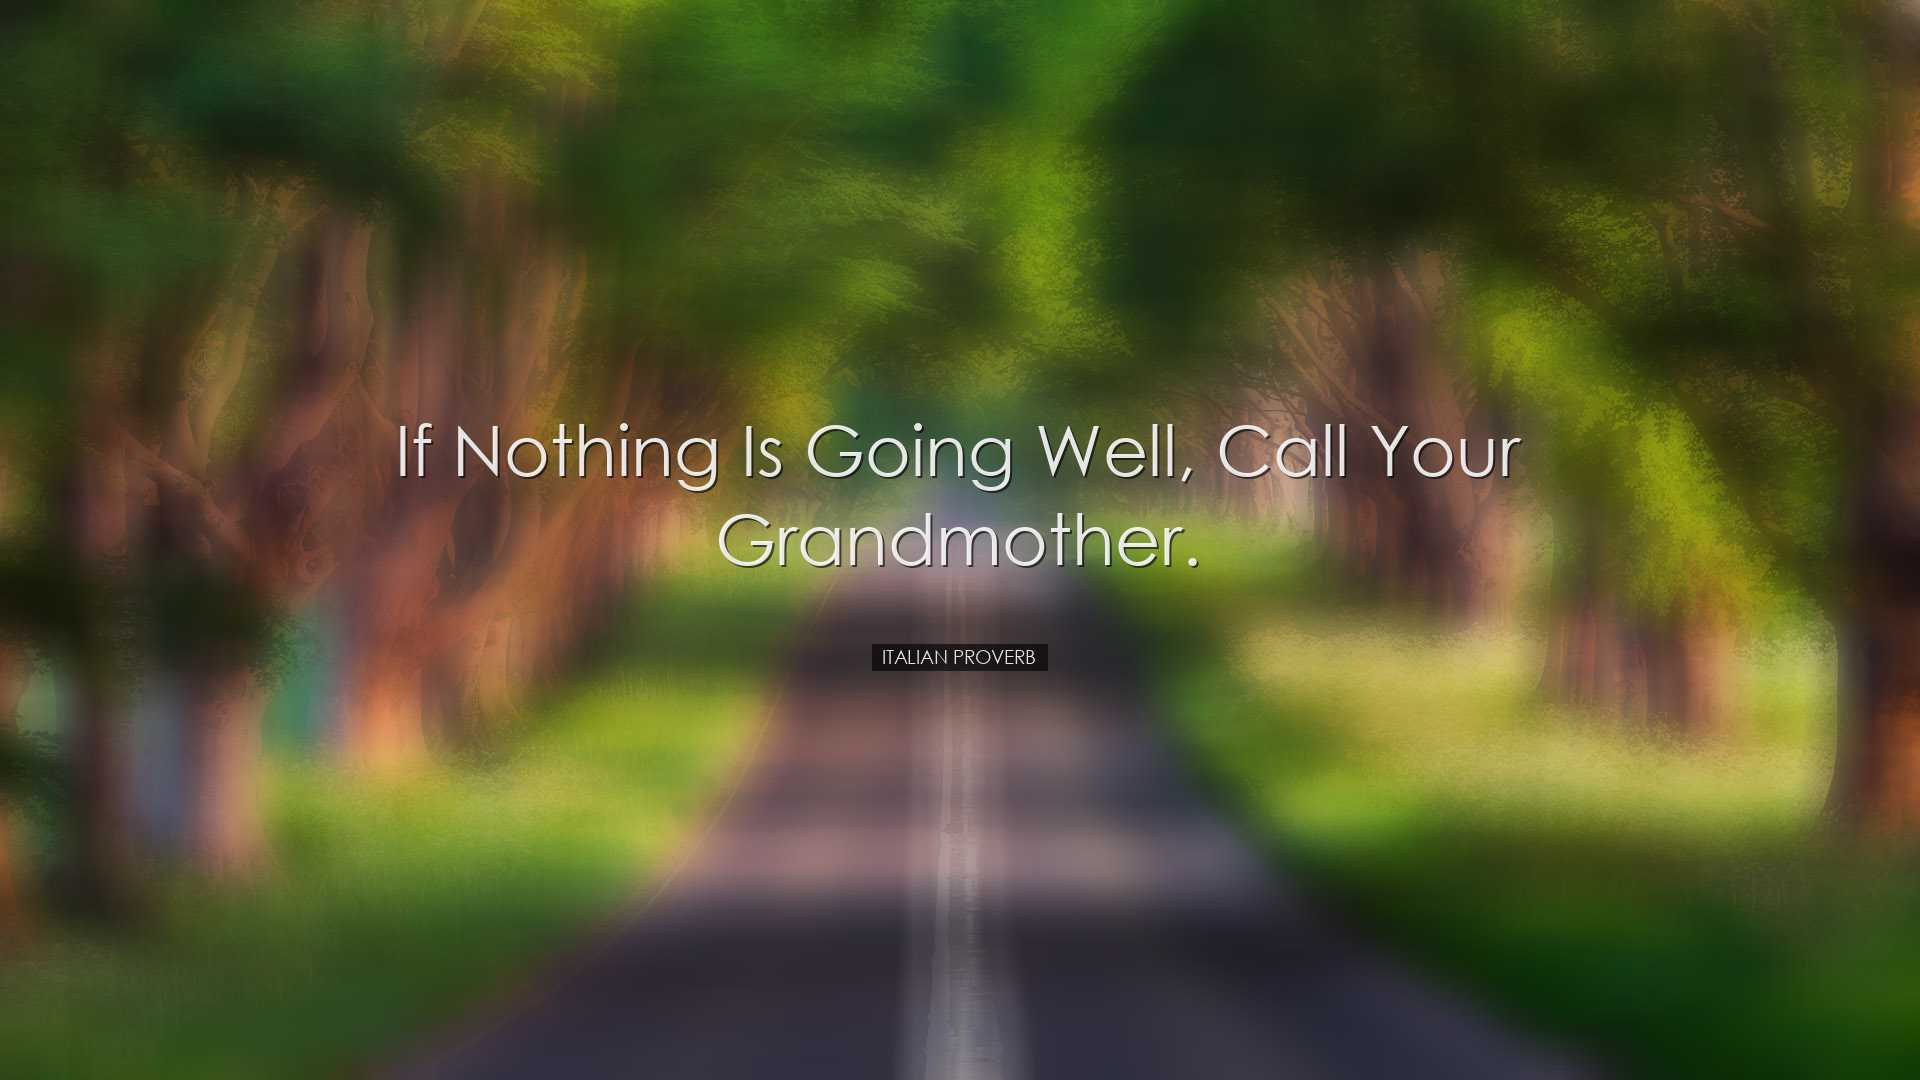 If nothing is going well, call your grandmother. - Italian Proverb